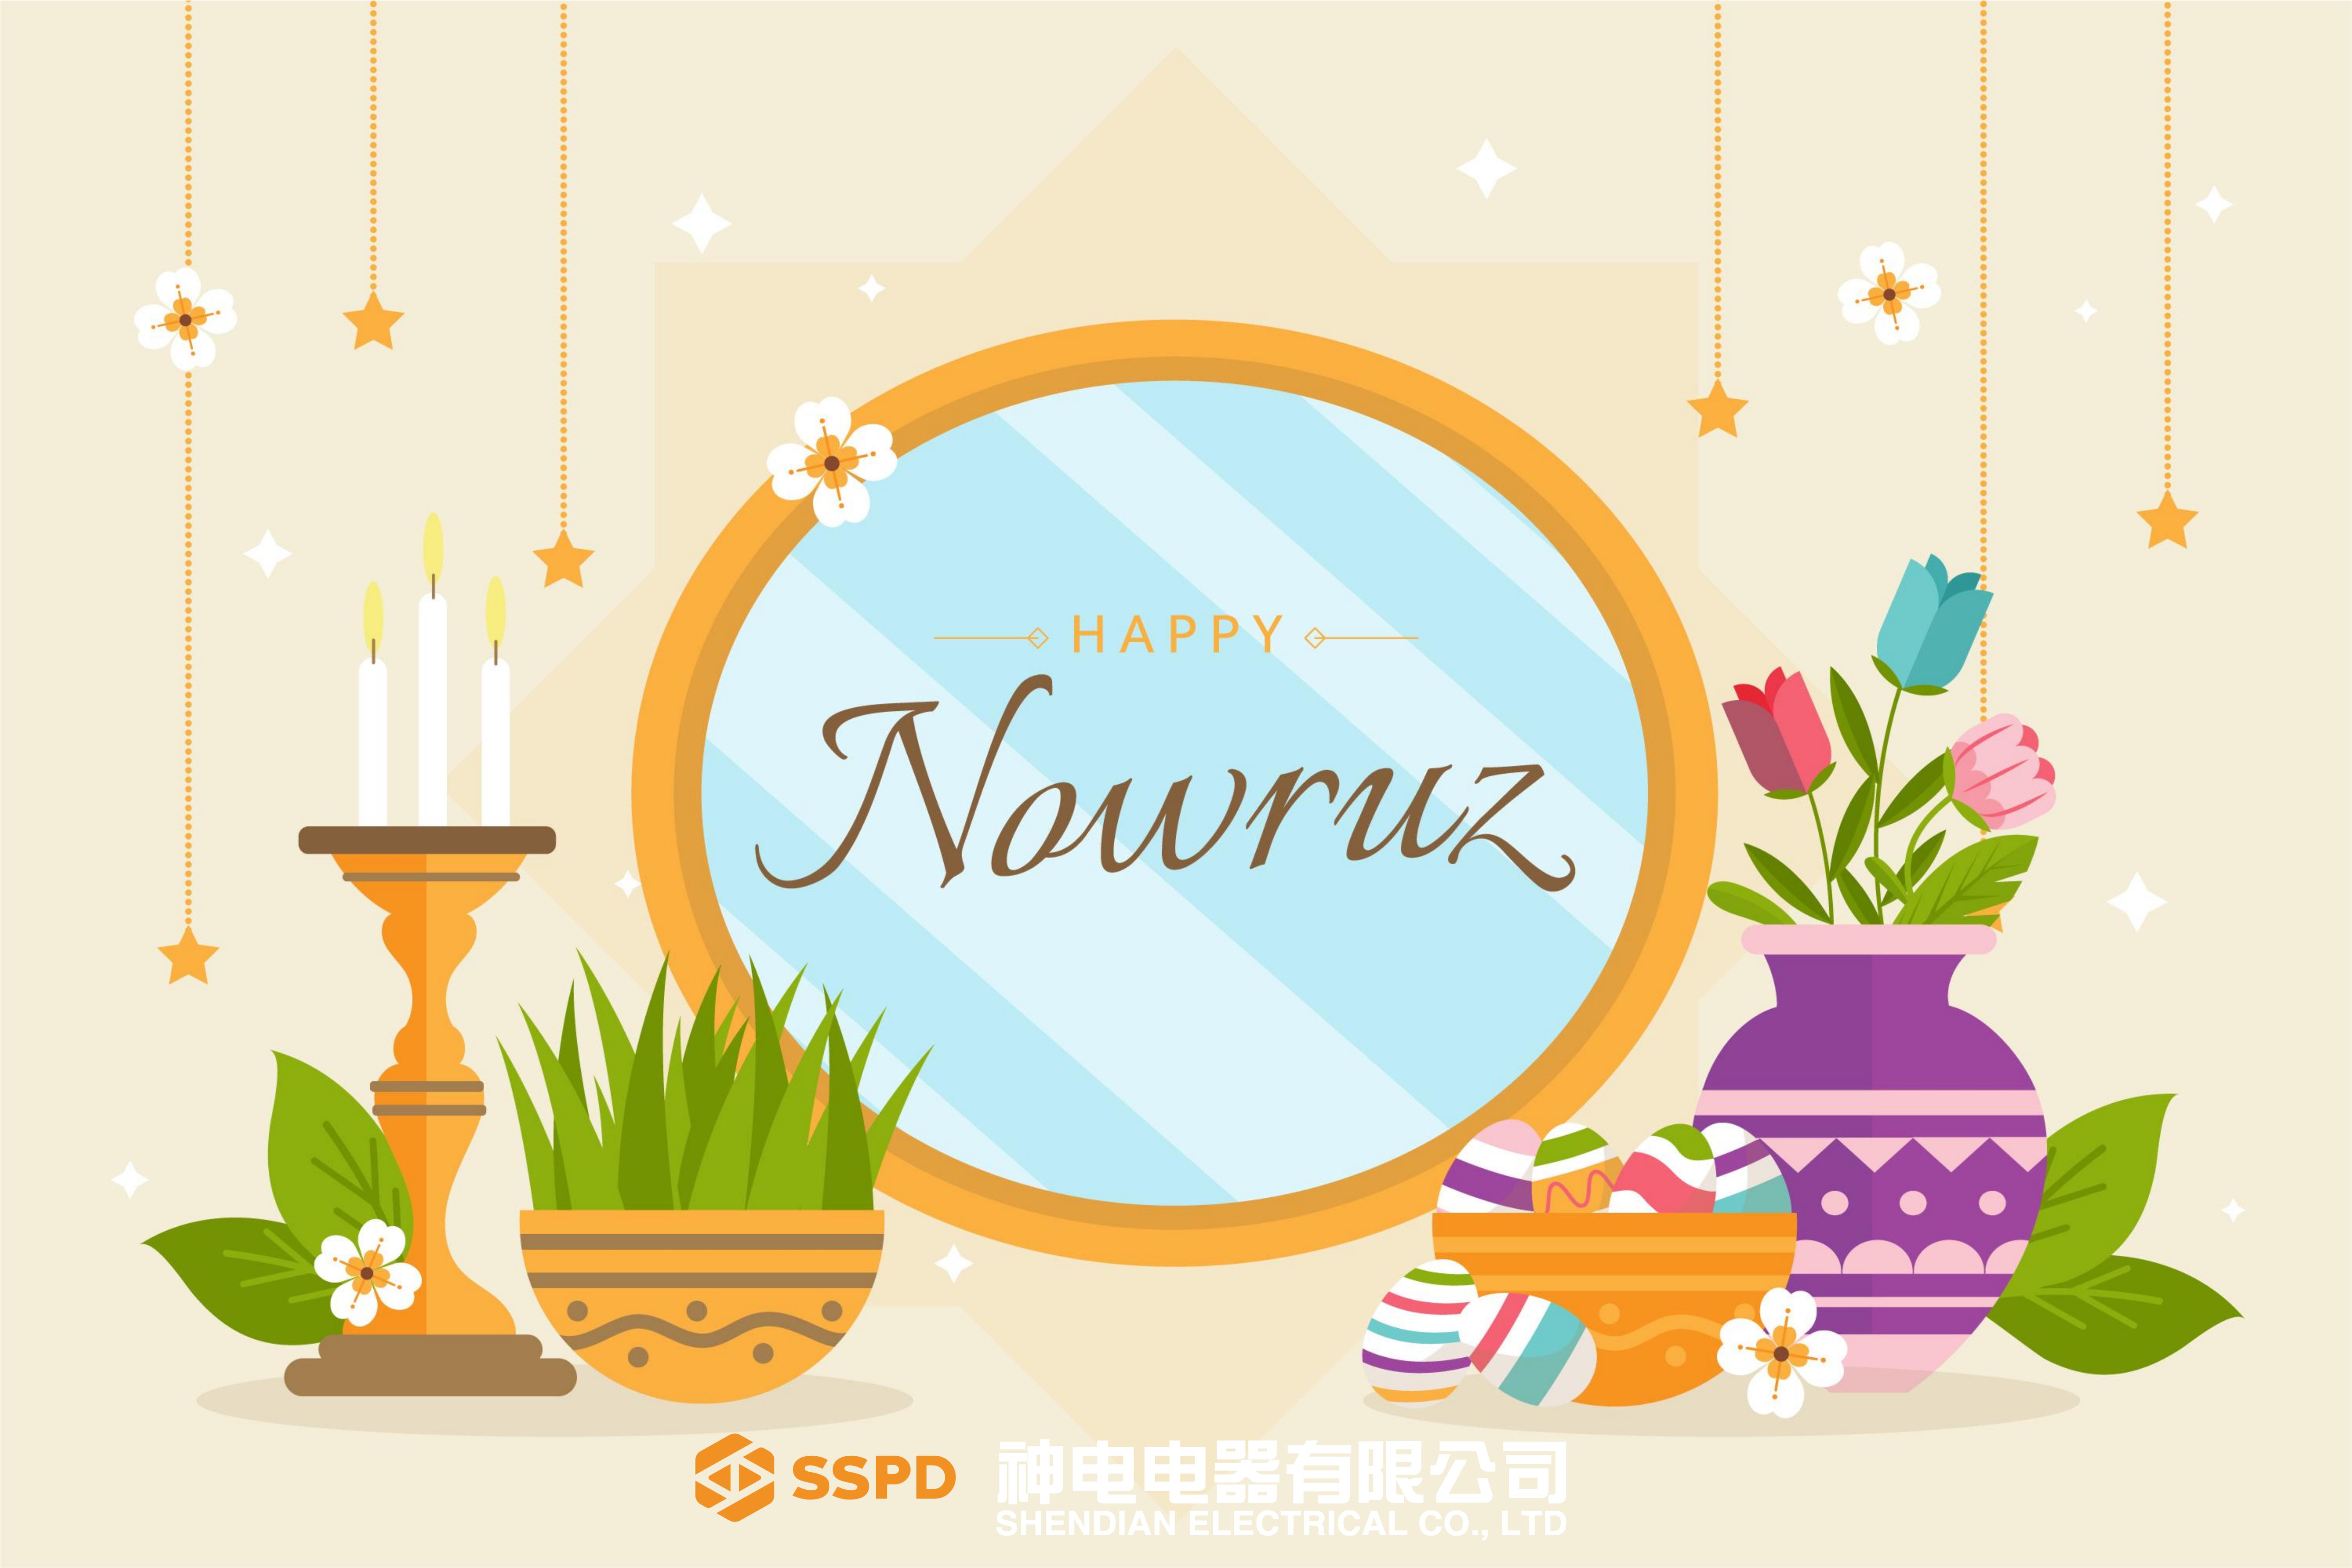 Celebrating Nowruz: The Persian New Year Tradition